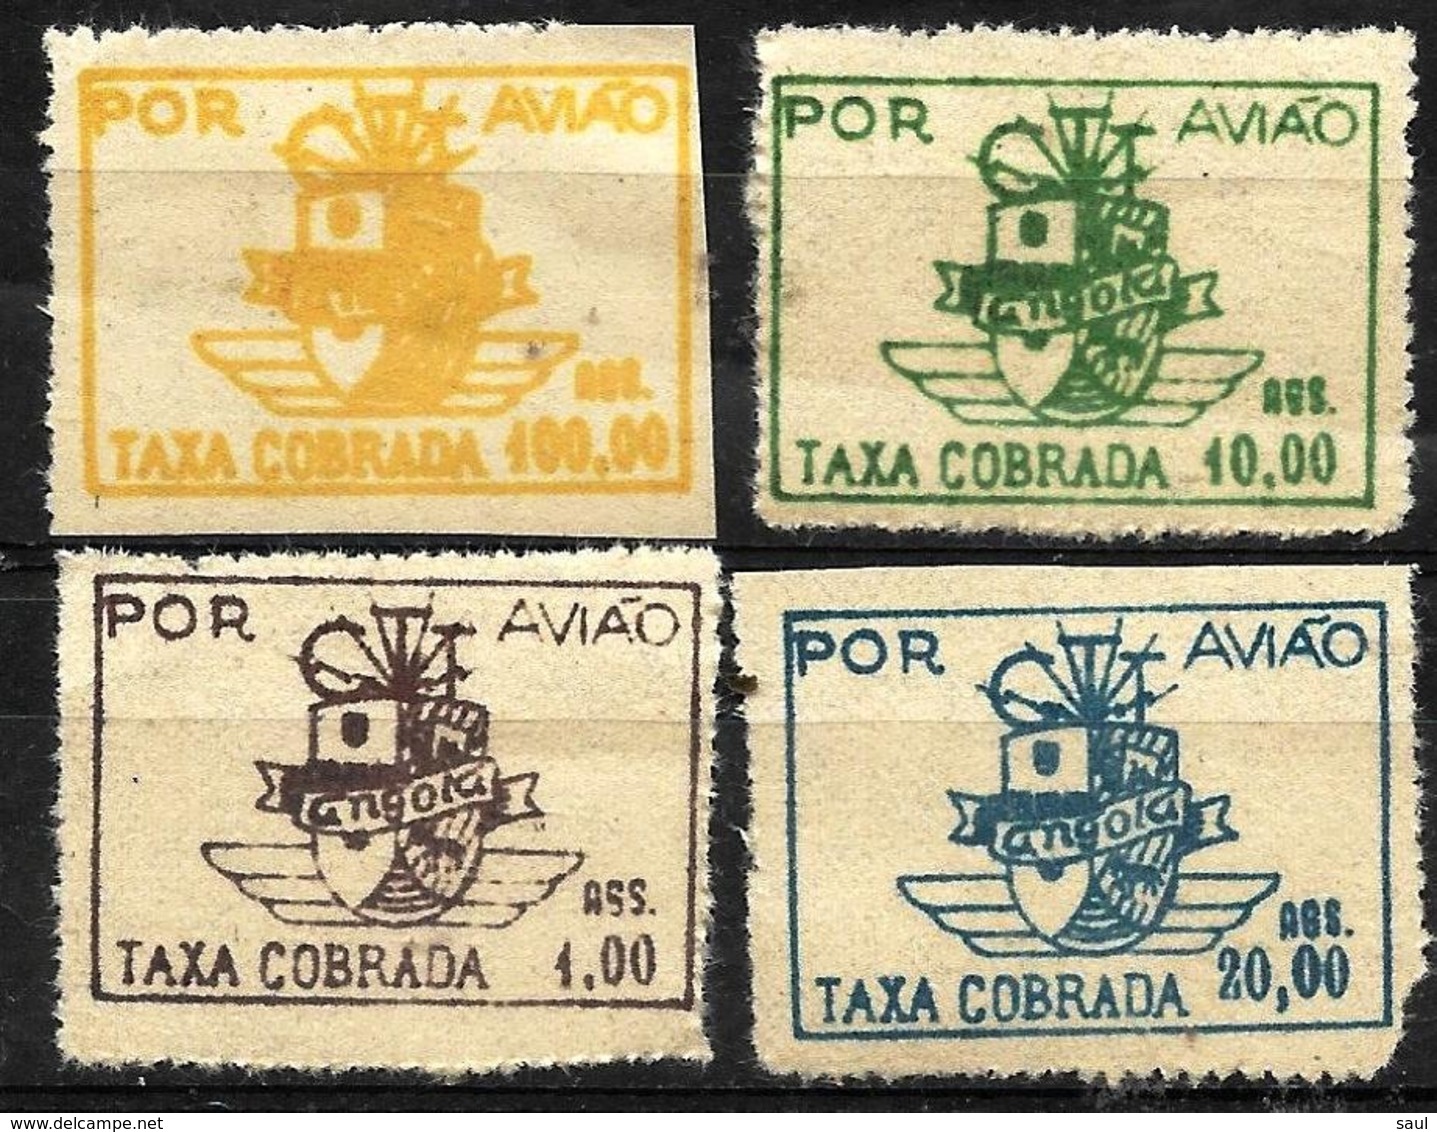 621 - PORTUGAL - ANGOLA - 1947- AIR MAIL ISSUE - FAUX, FORGERIES, FALSES, FALSCHEN, FAKES, FALSOS - Collections (sans Albums)